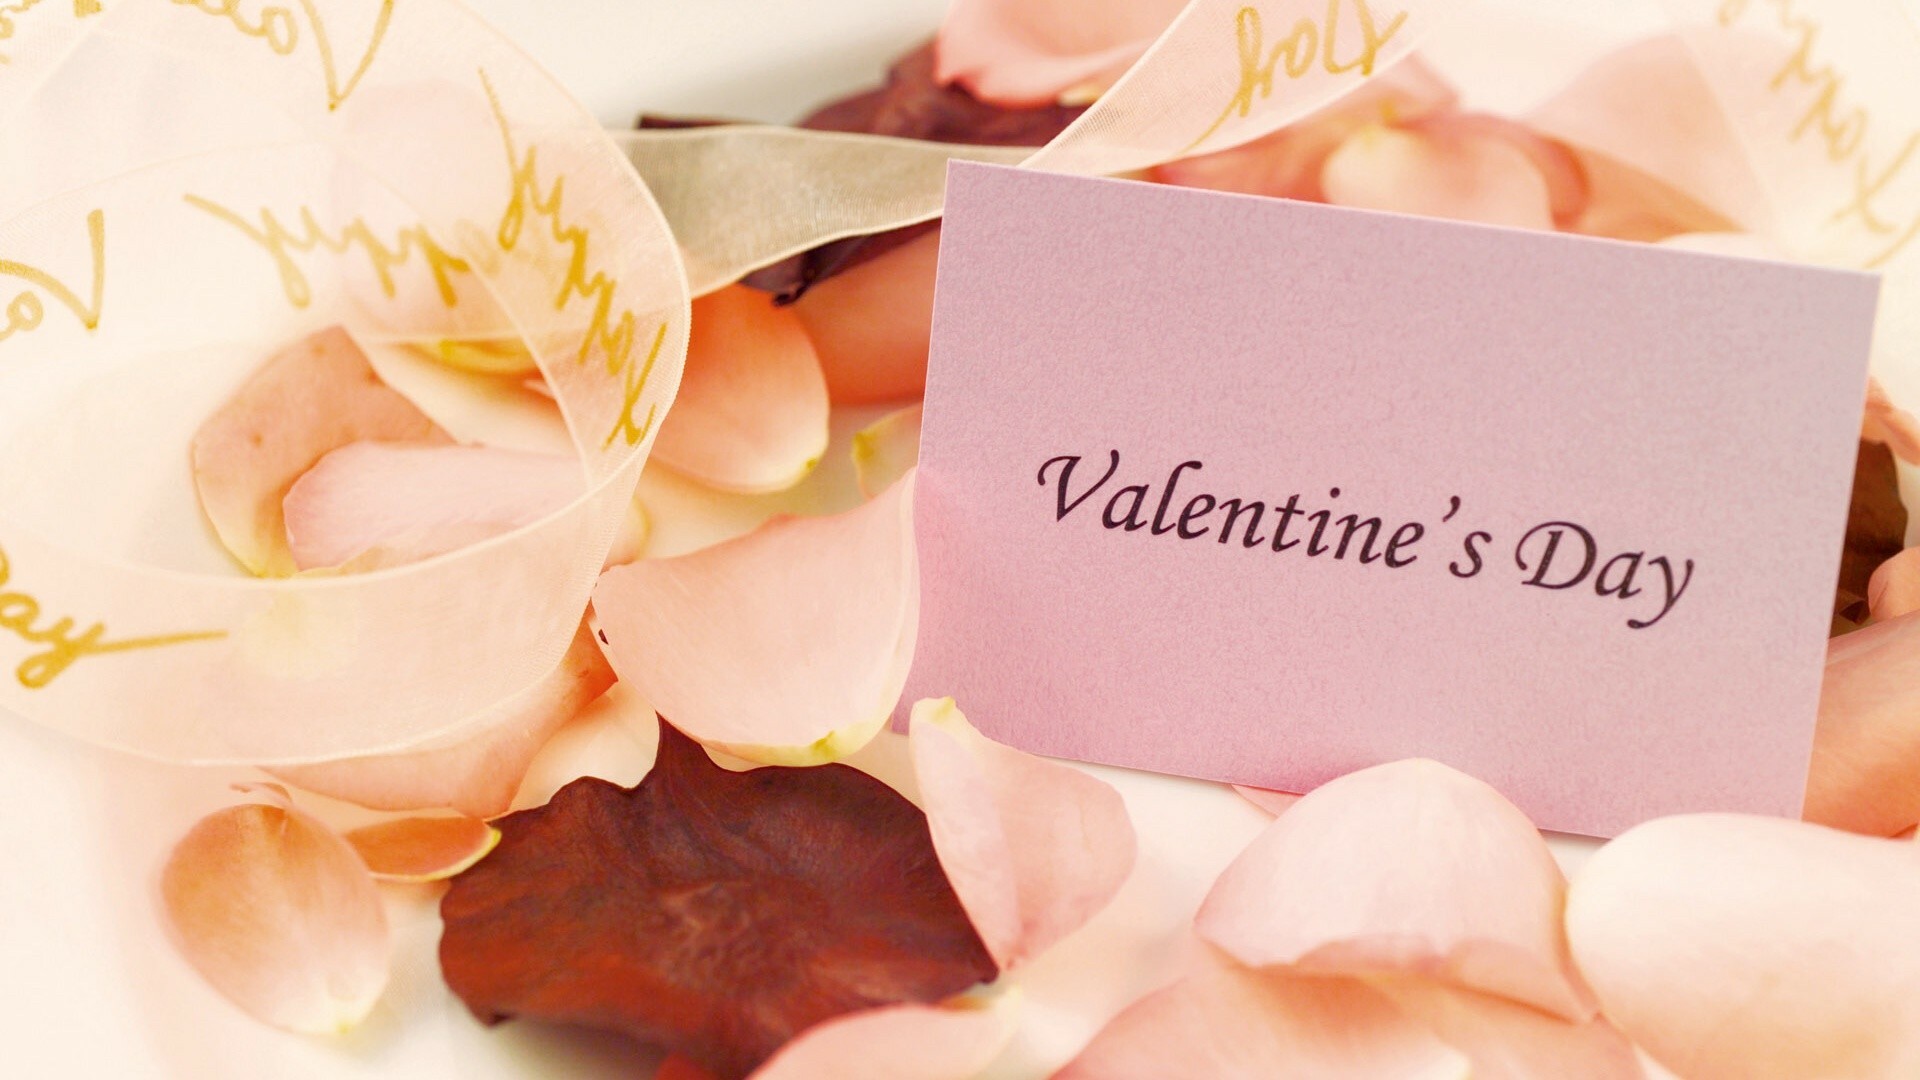 Valentine's Day: Time for exchanging tokens of affection, Greeting cards. 1920x1080 Full HD Background.